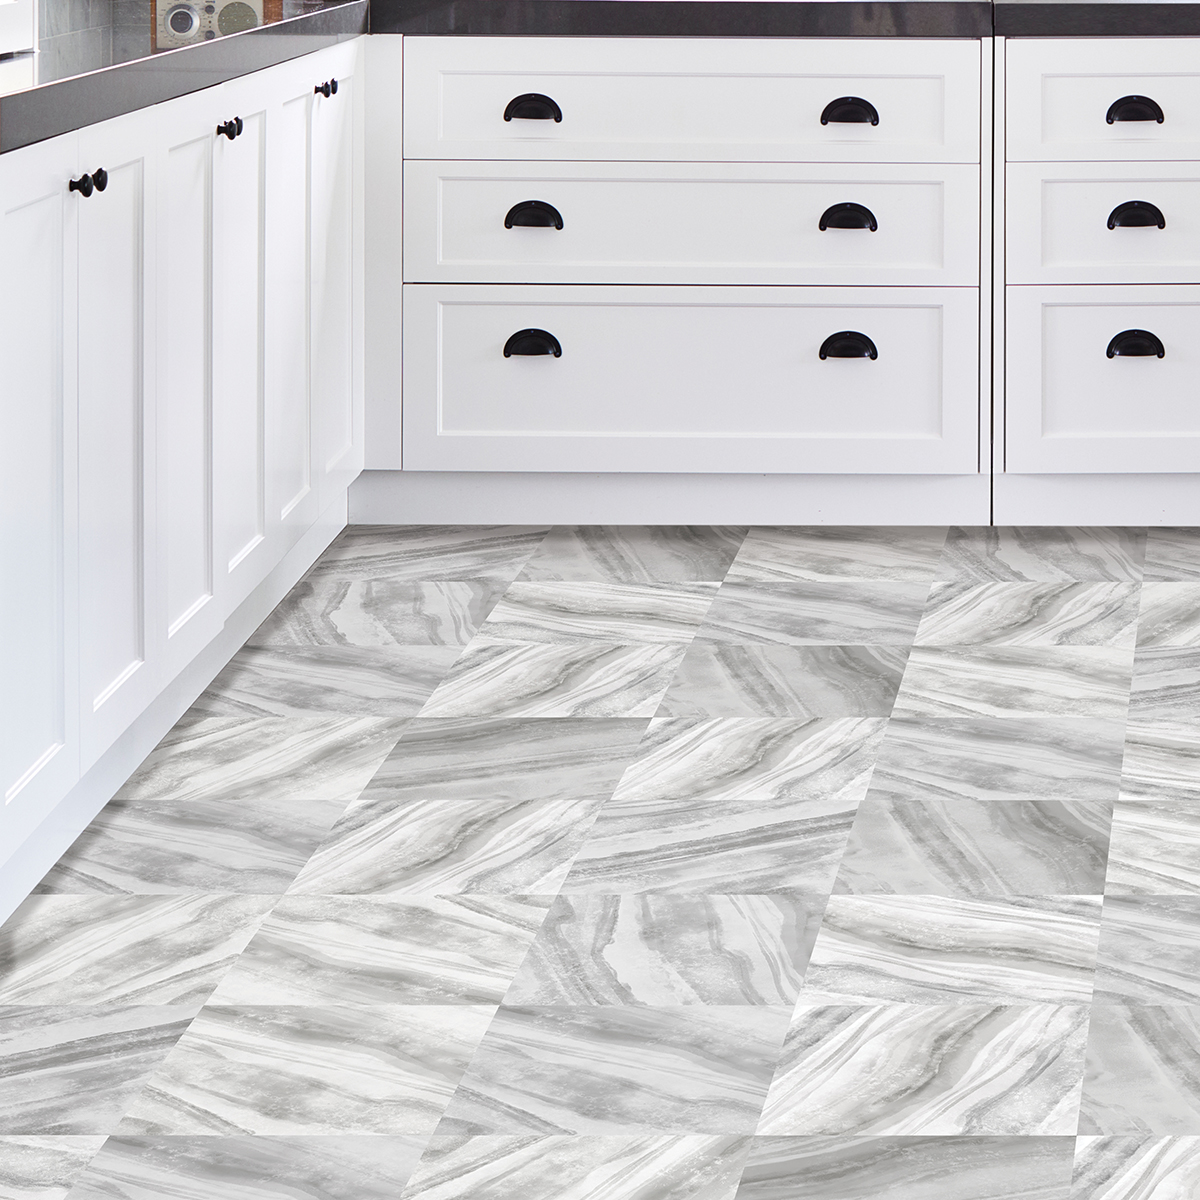 peel and stick floor tiles for laundry room